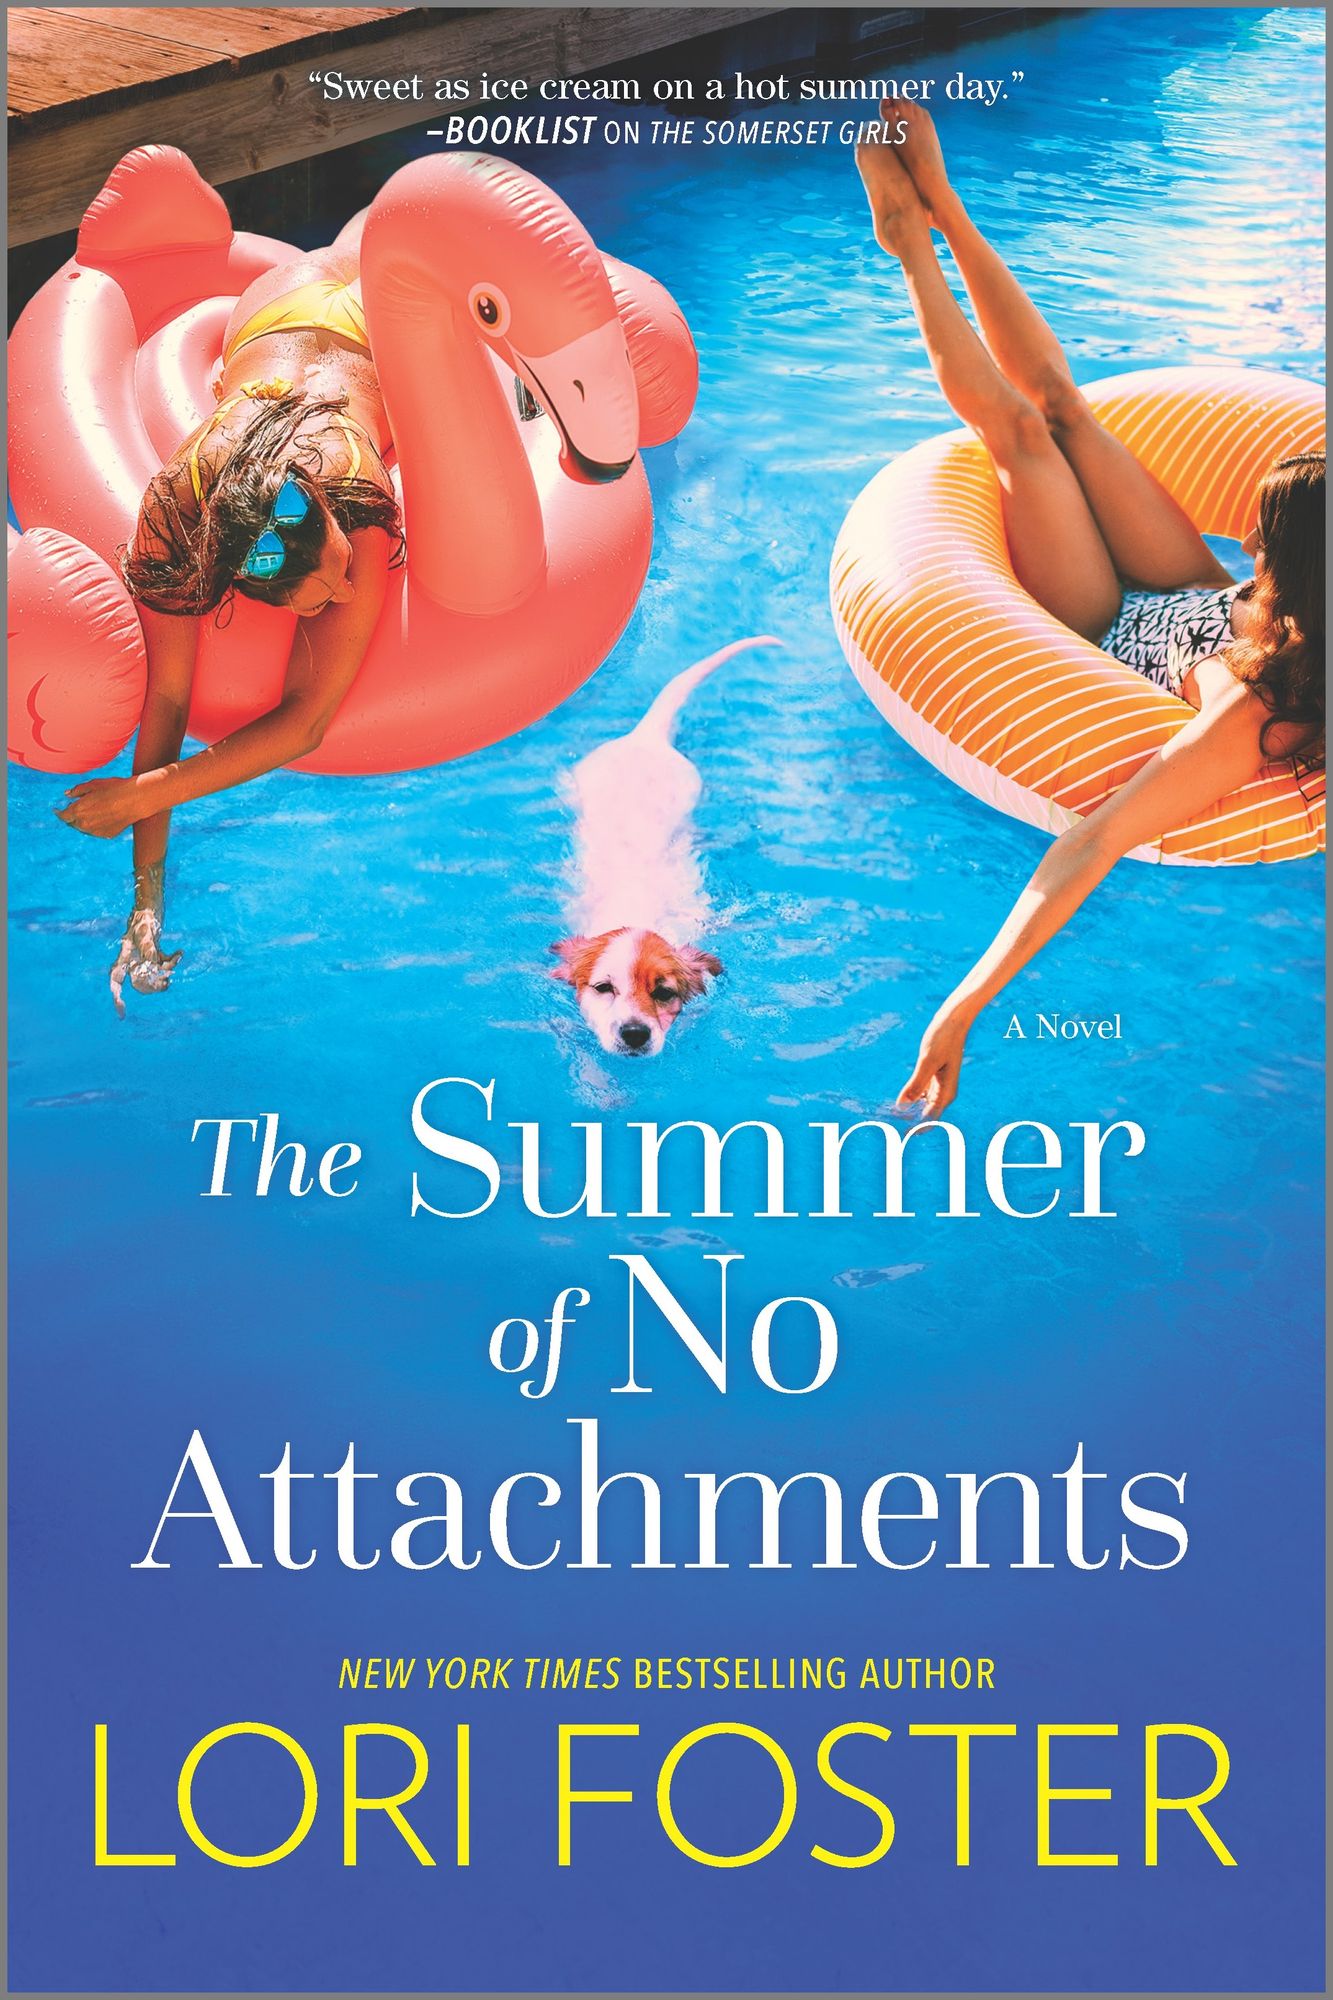 The Summer of No Attachments by Lori Foster